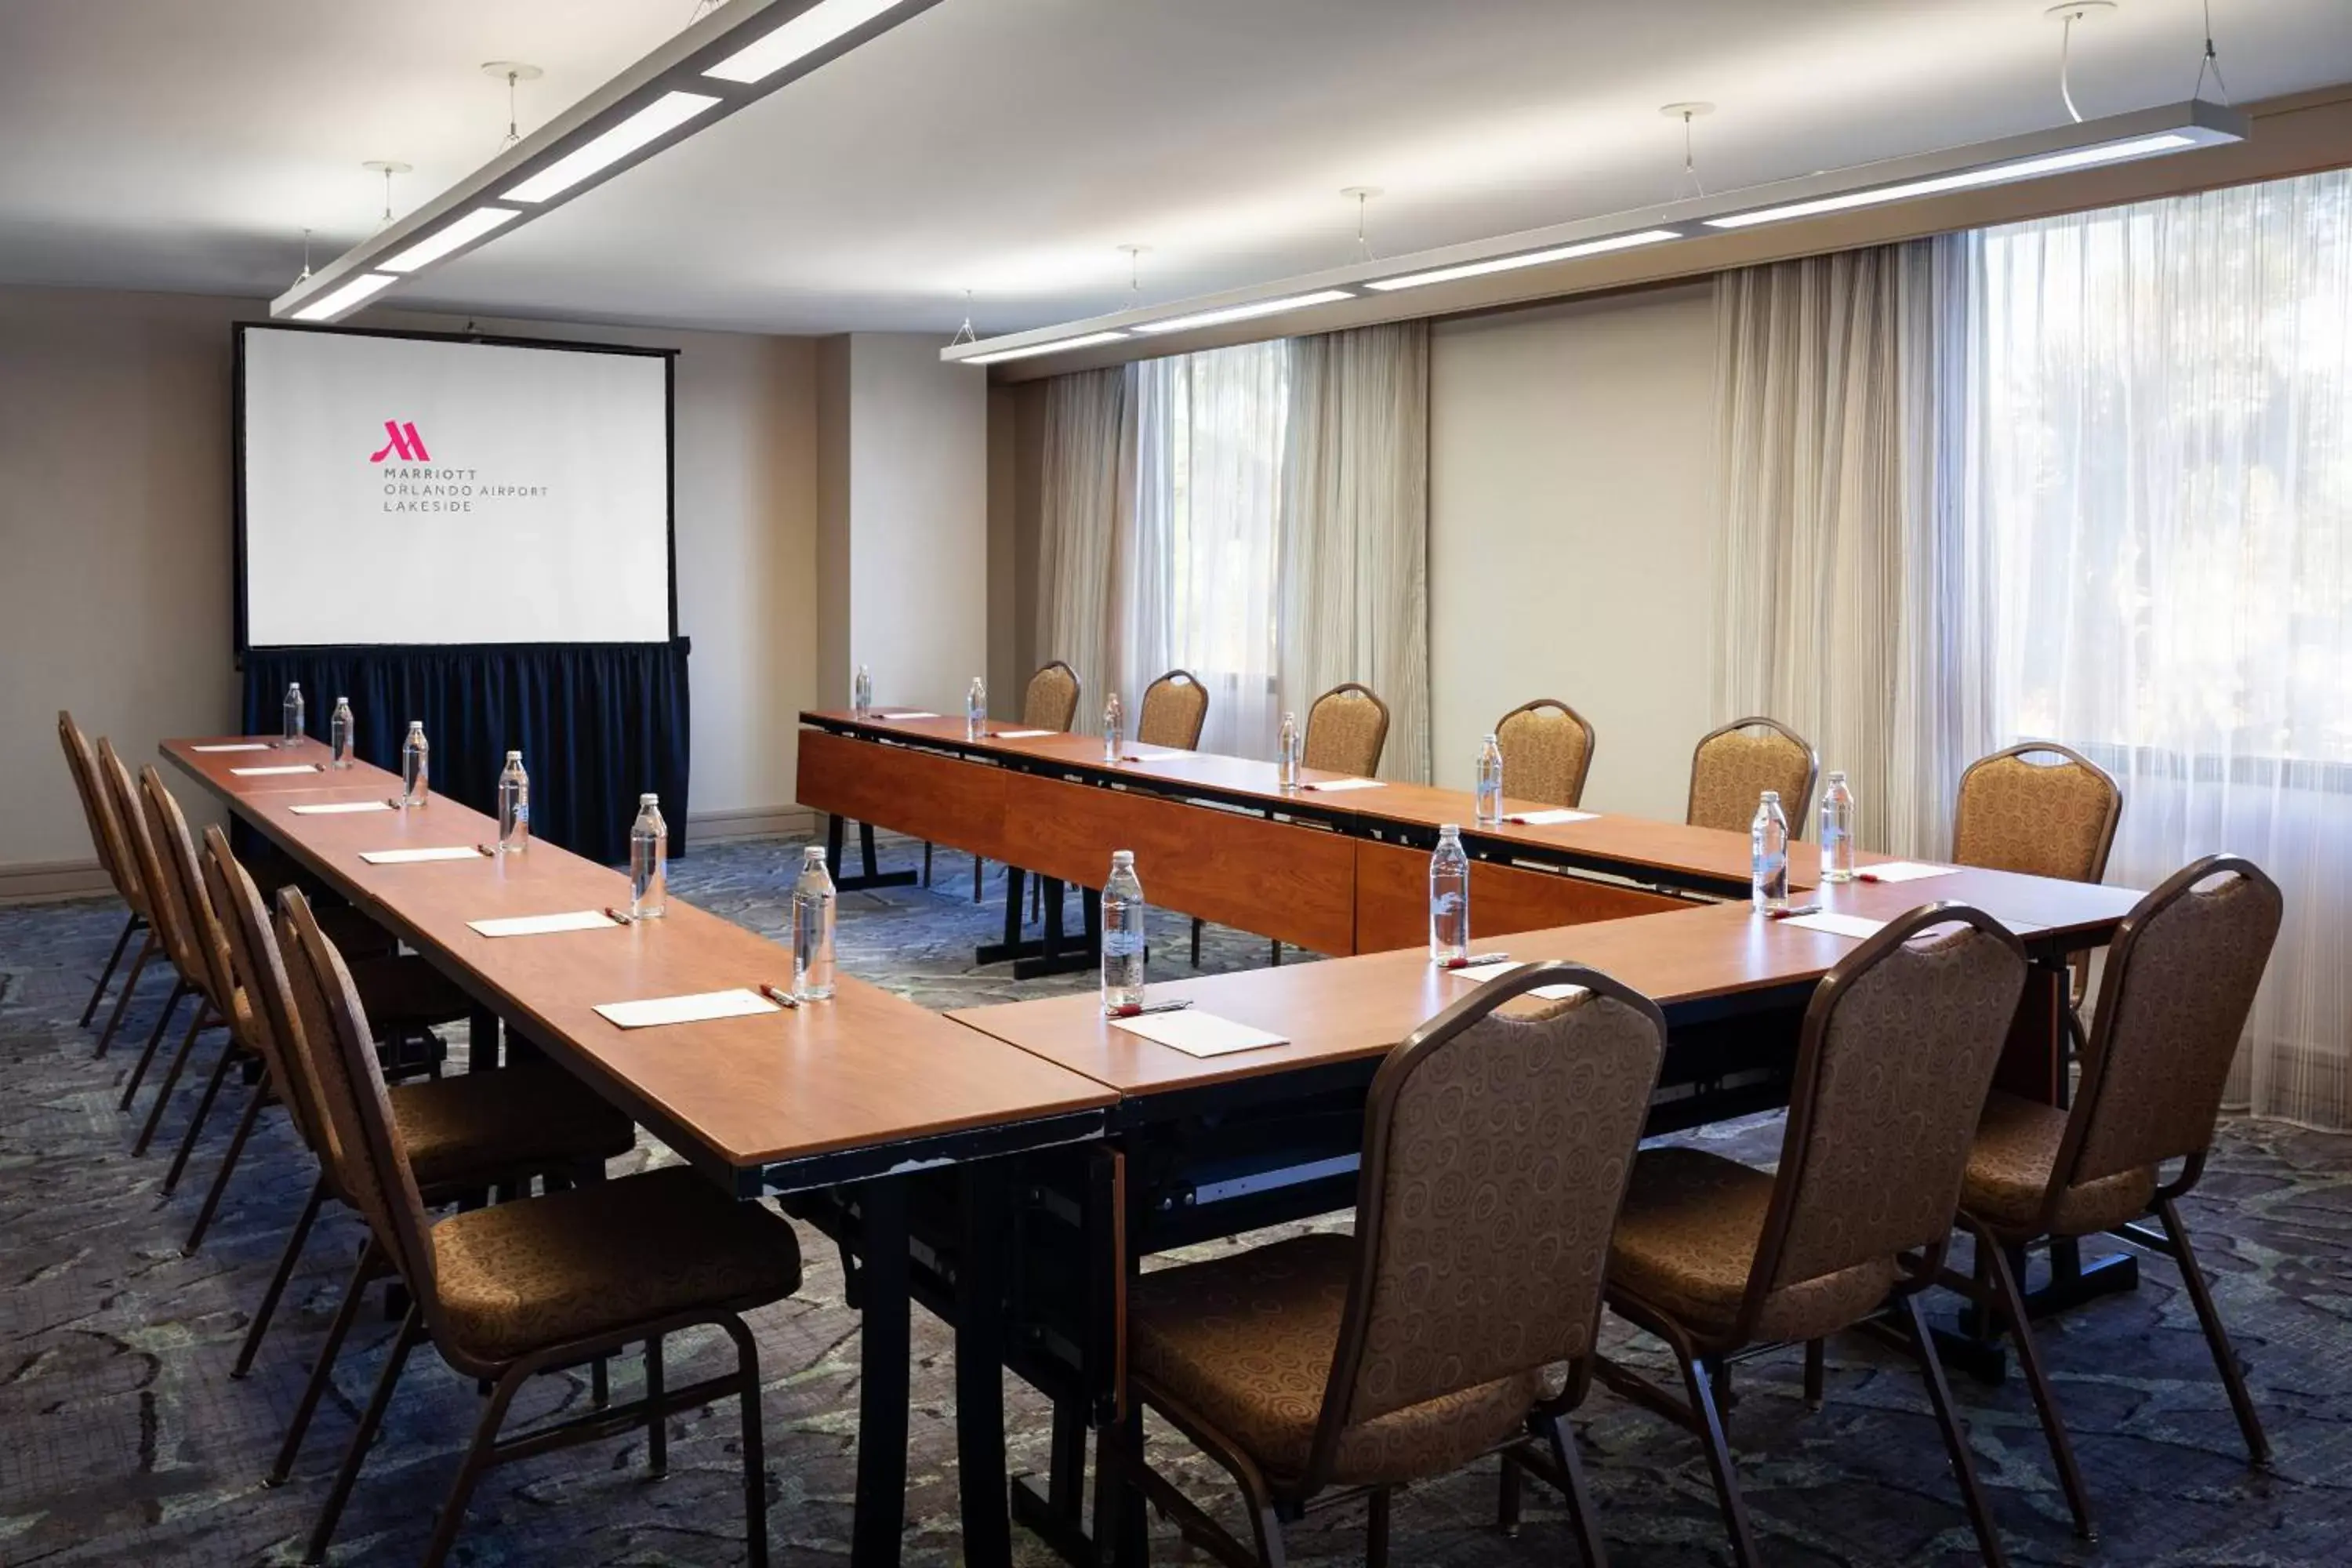 Meeting/conference room in Marriott Orlando Airport Lakeside